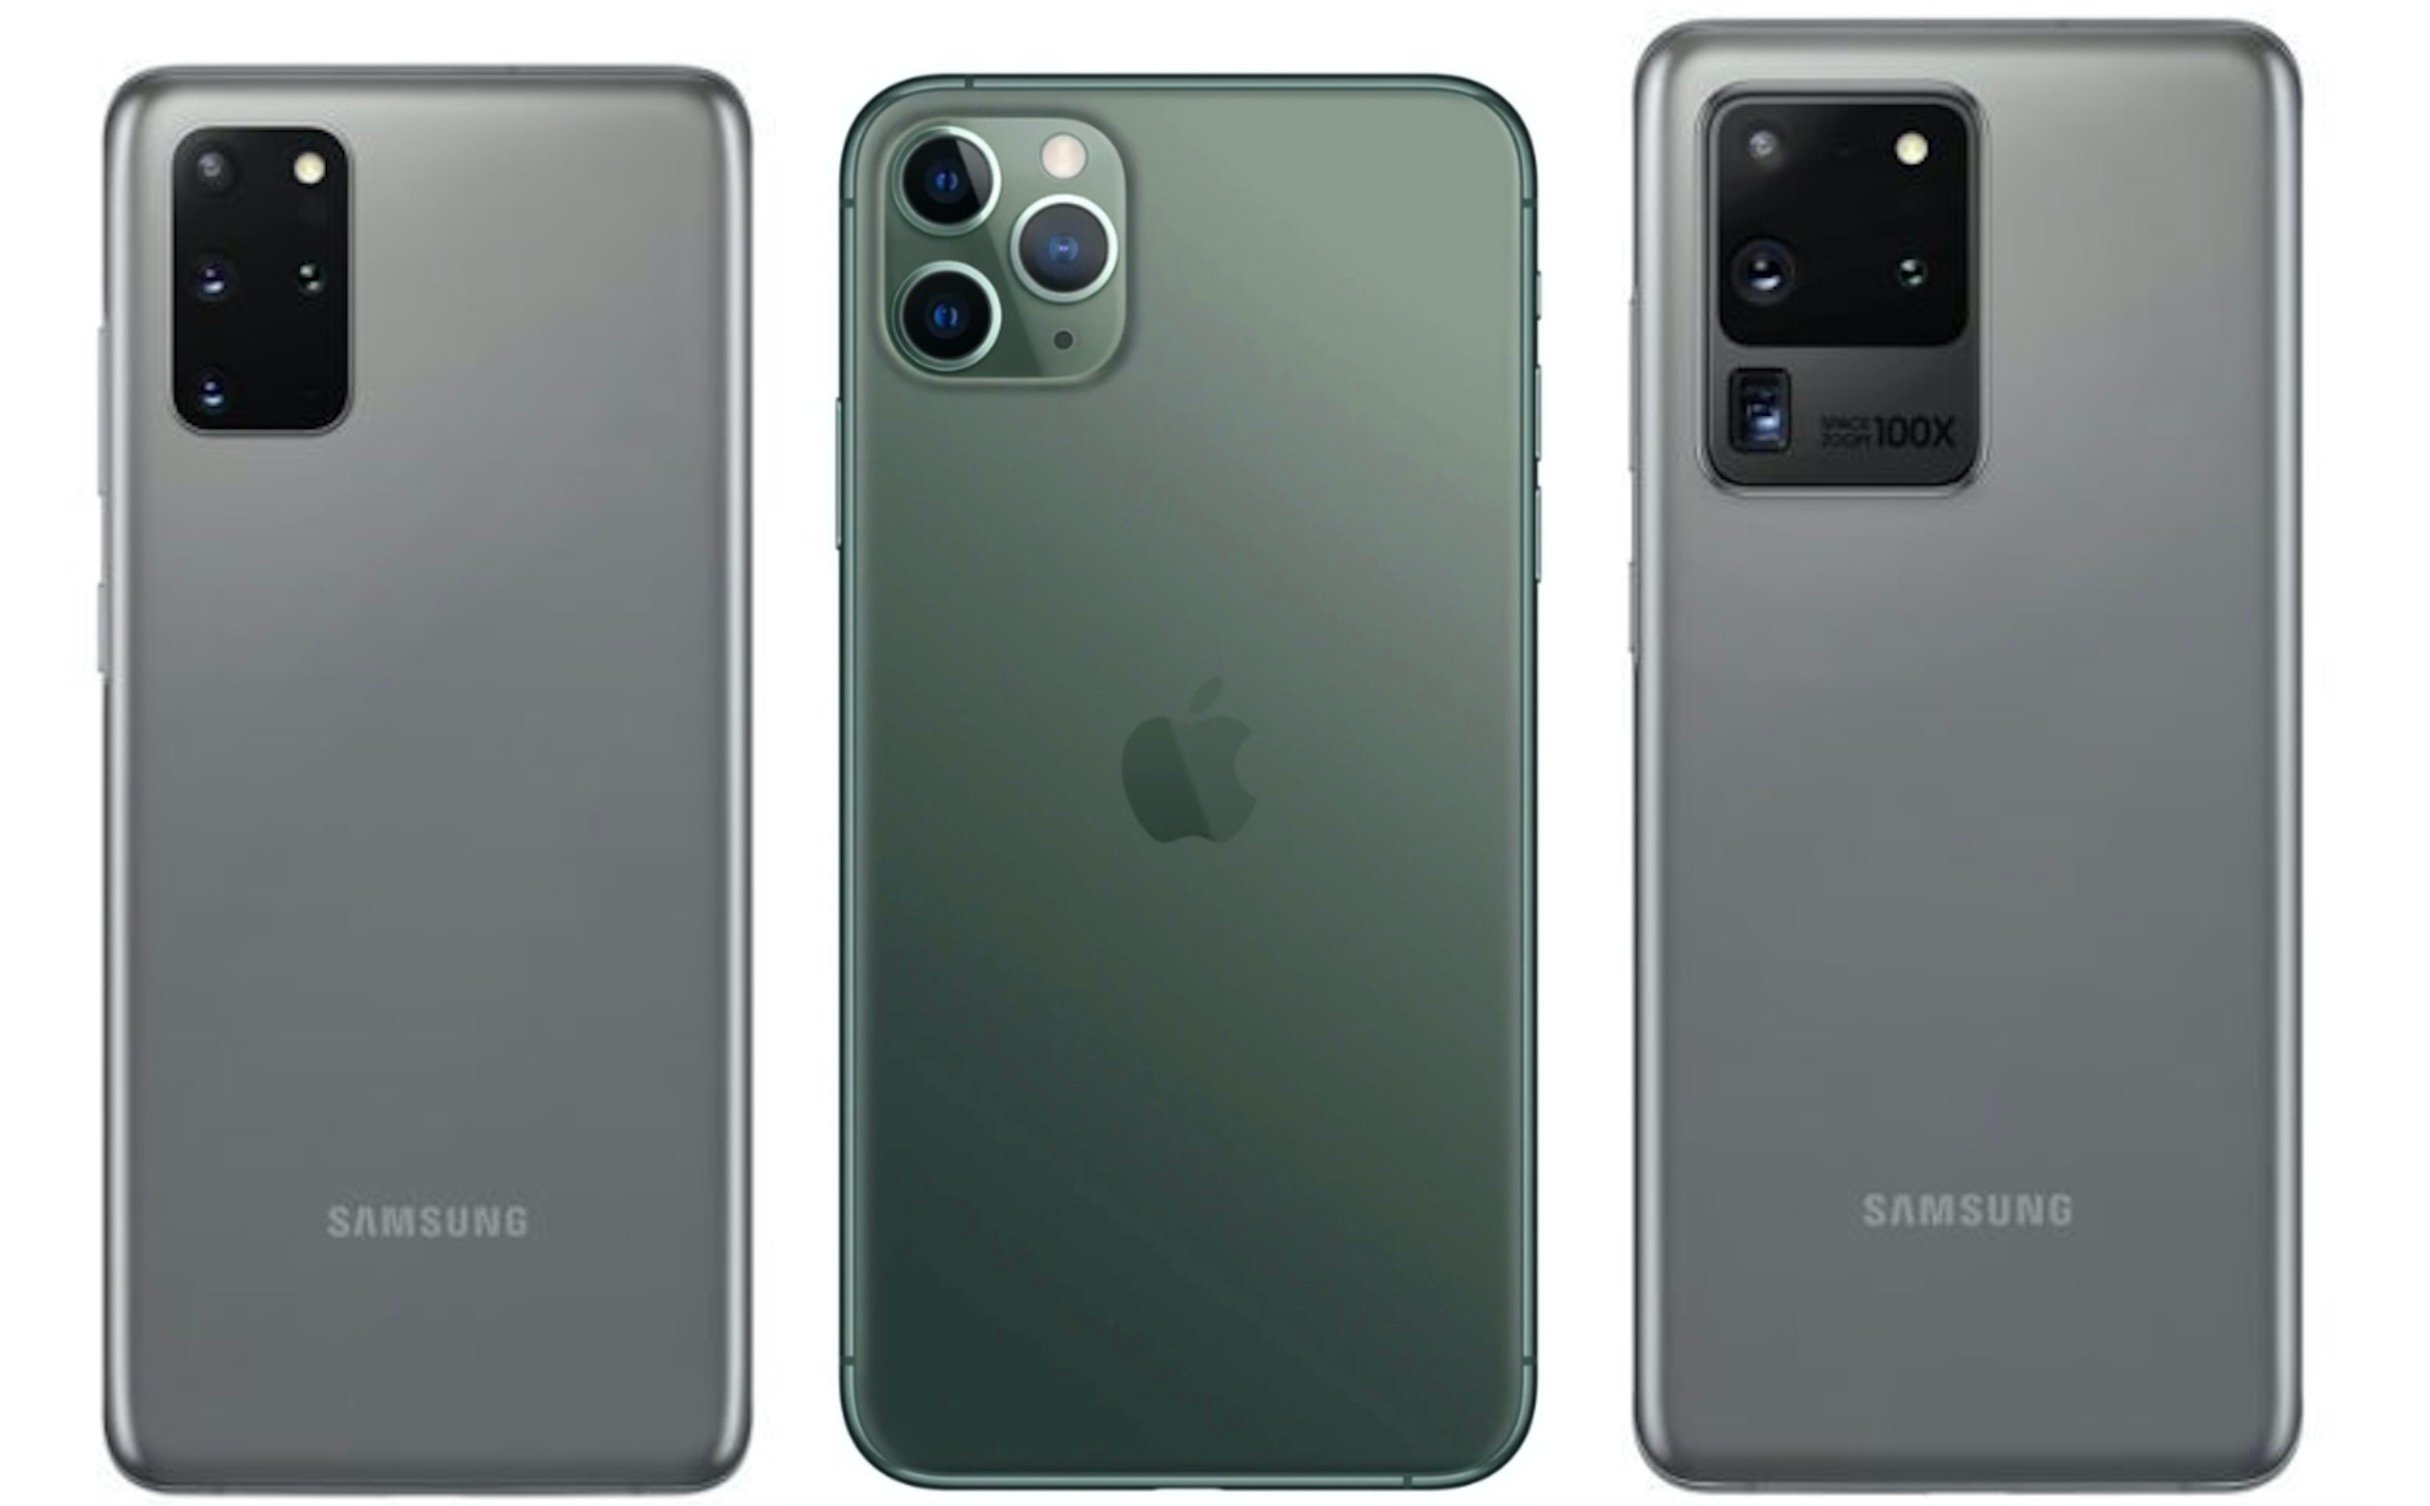 Samsung Galaxy S20 Ultra Vs Iphone 11 Pro Max Which One To Buy